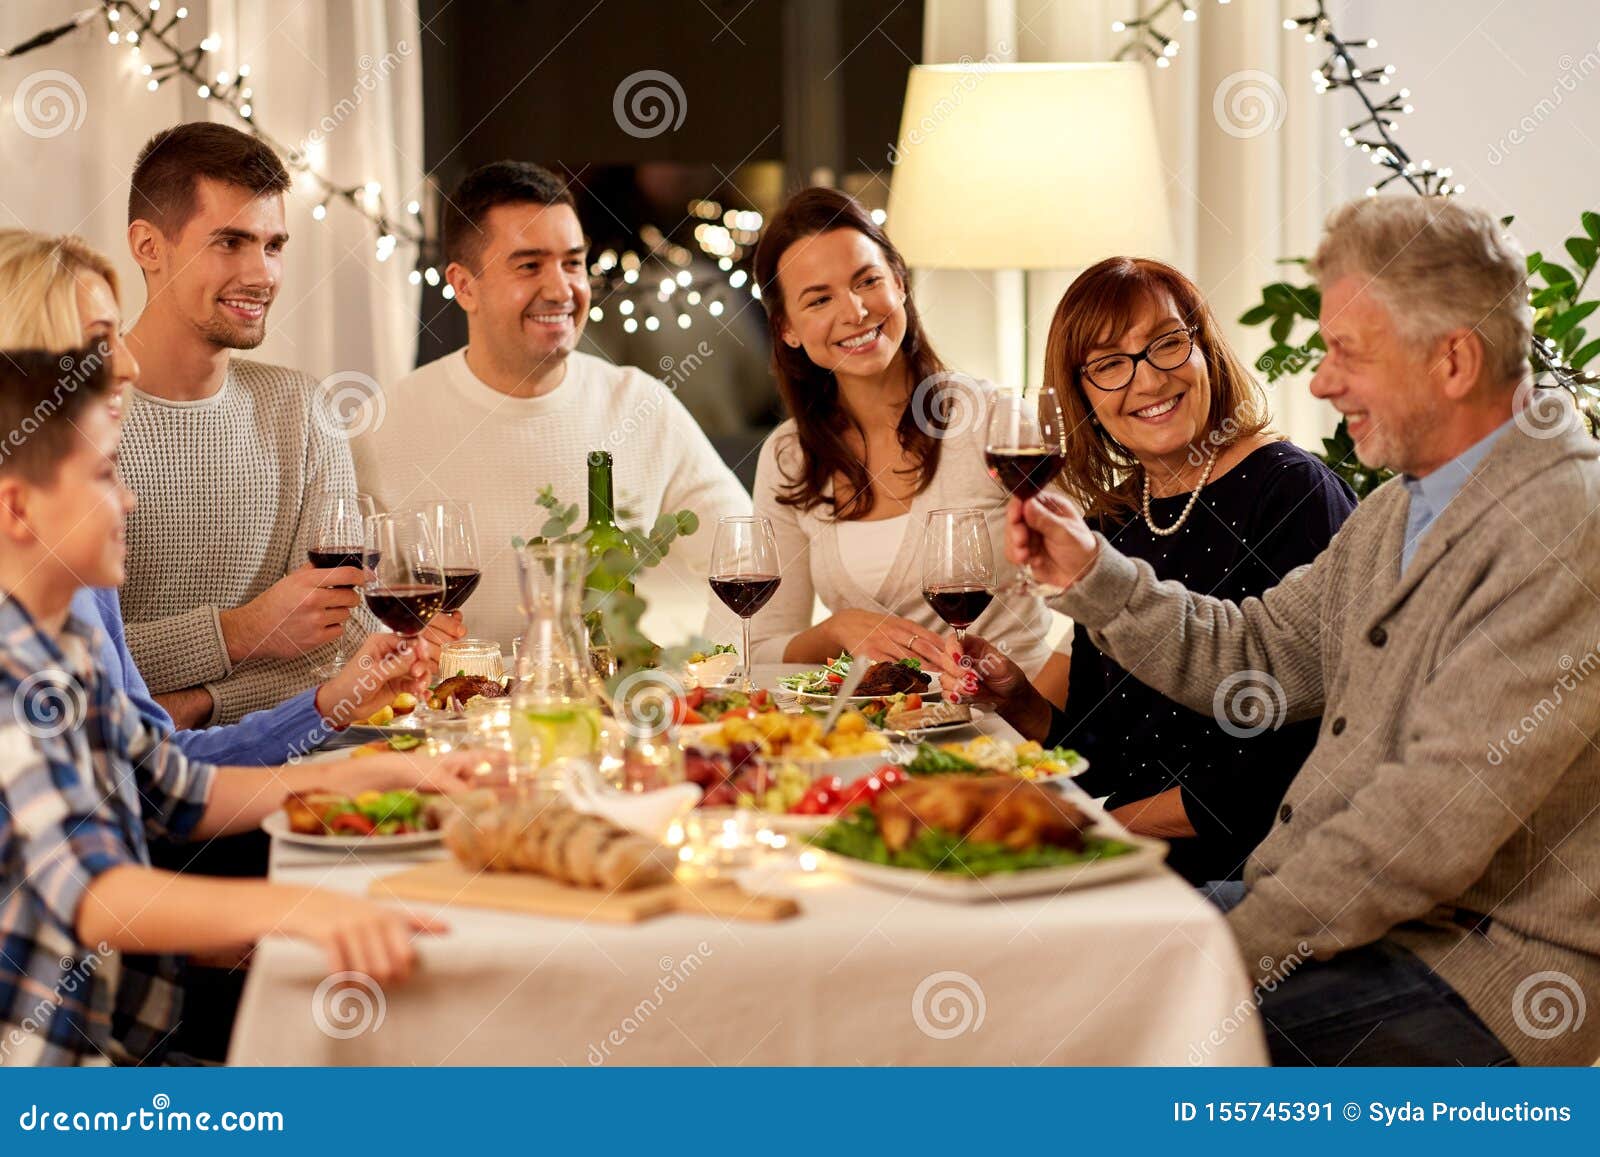 Happy Family Having Dinner Party at Home Stock Image - Image of indoors